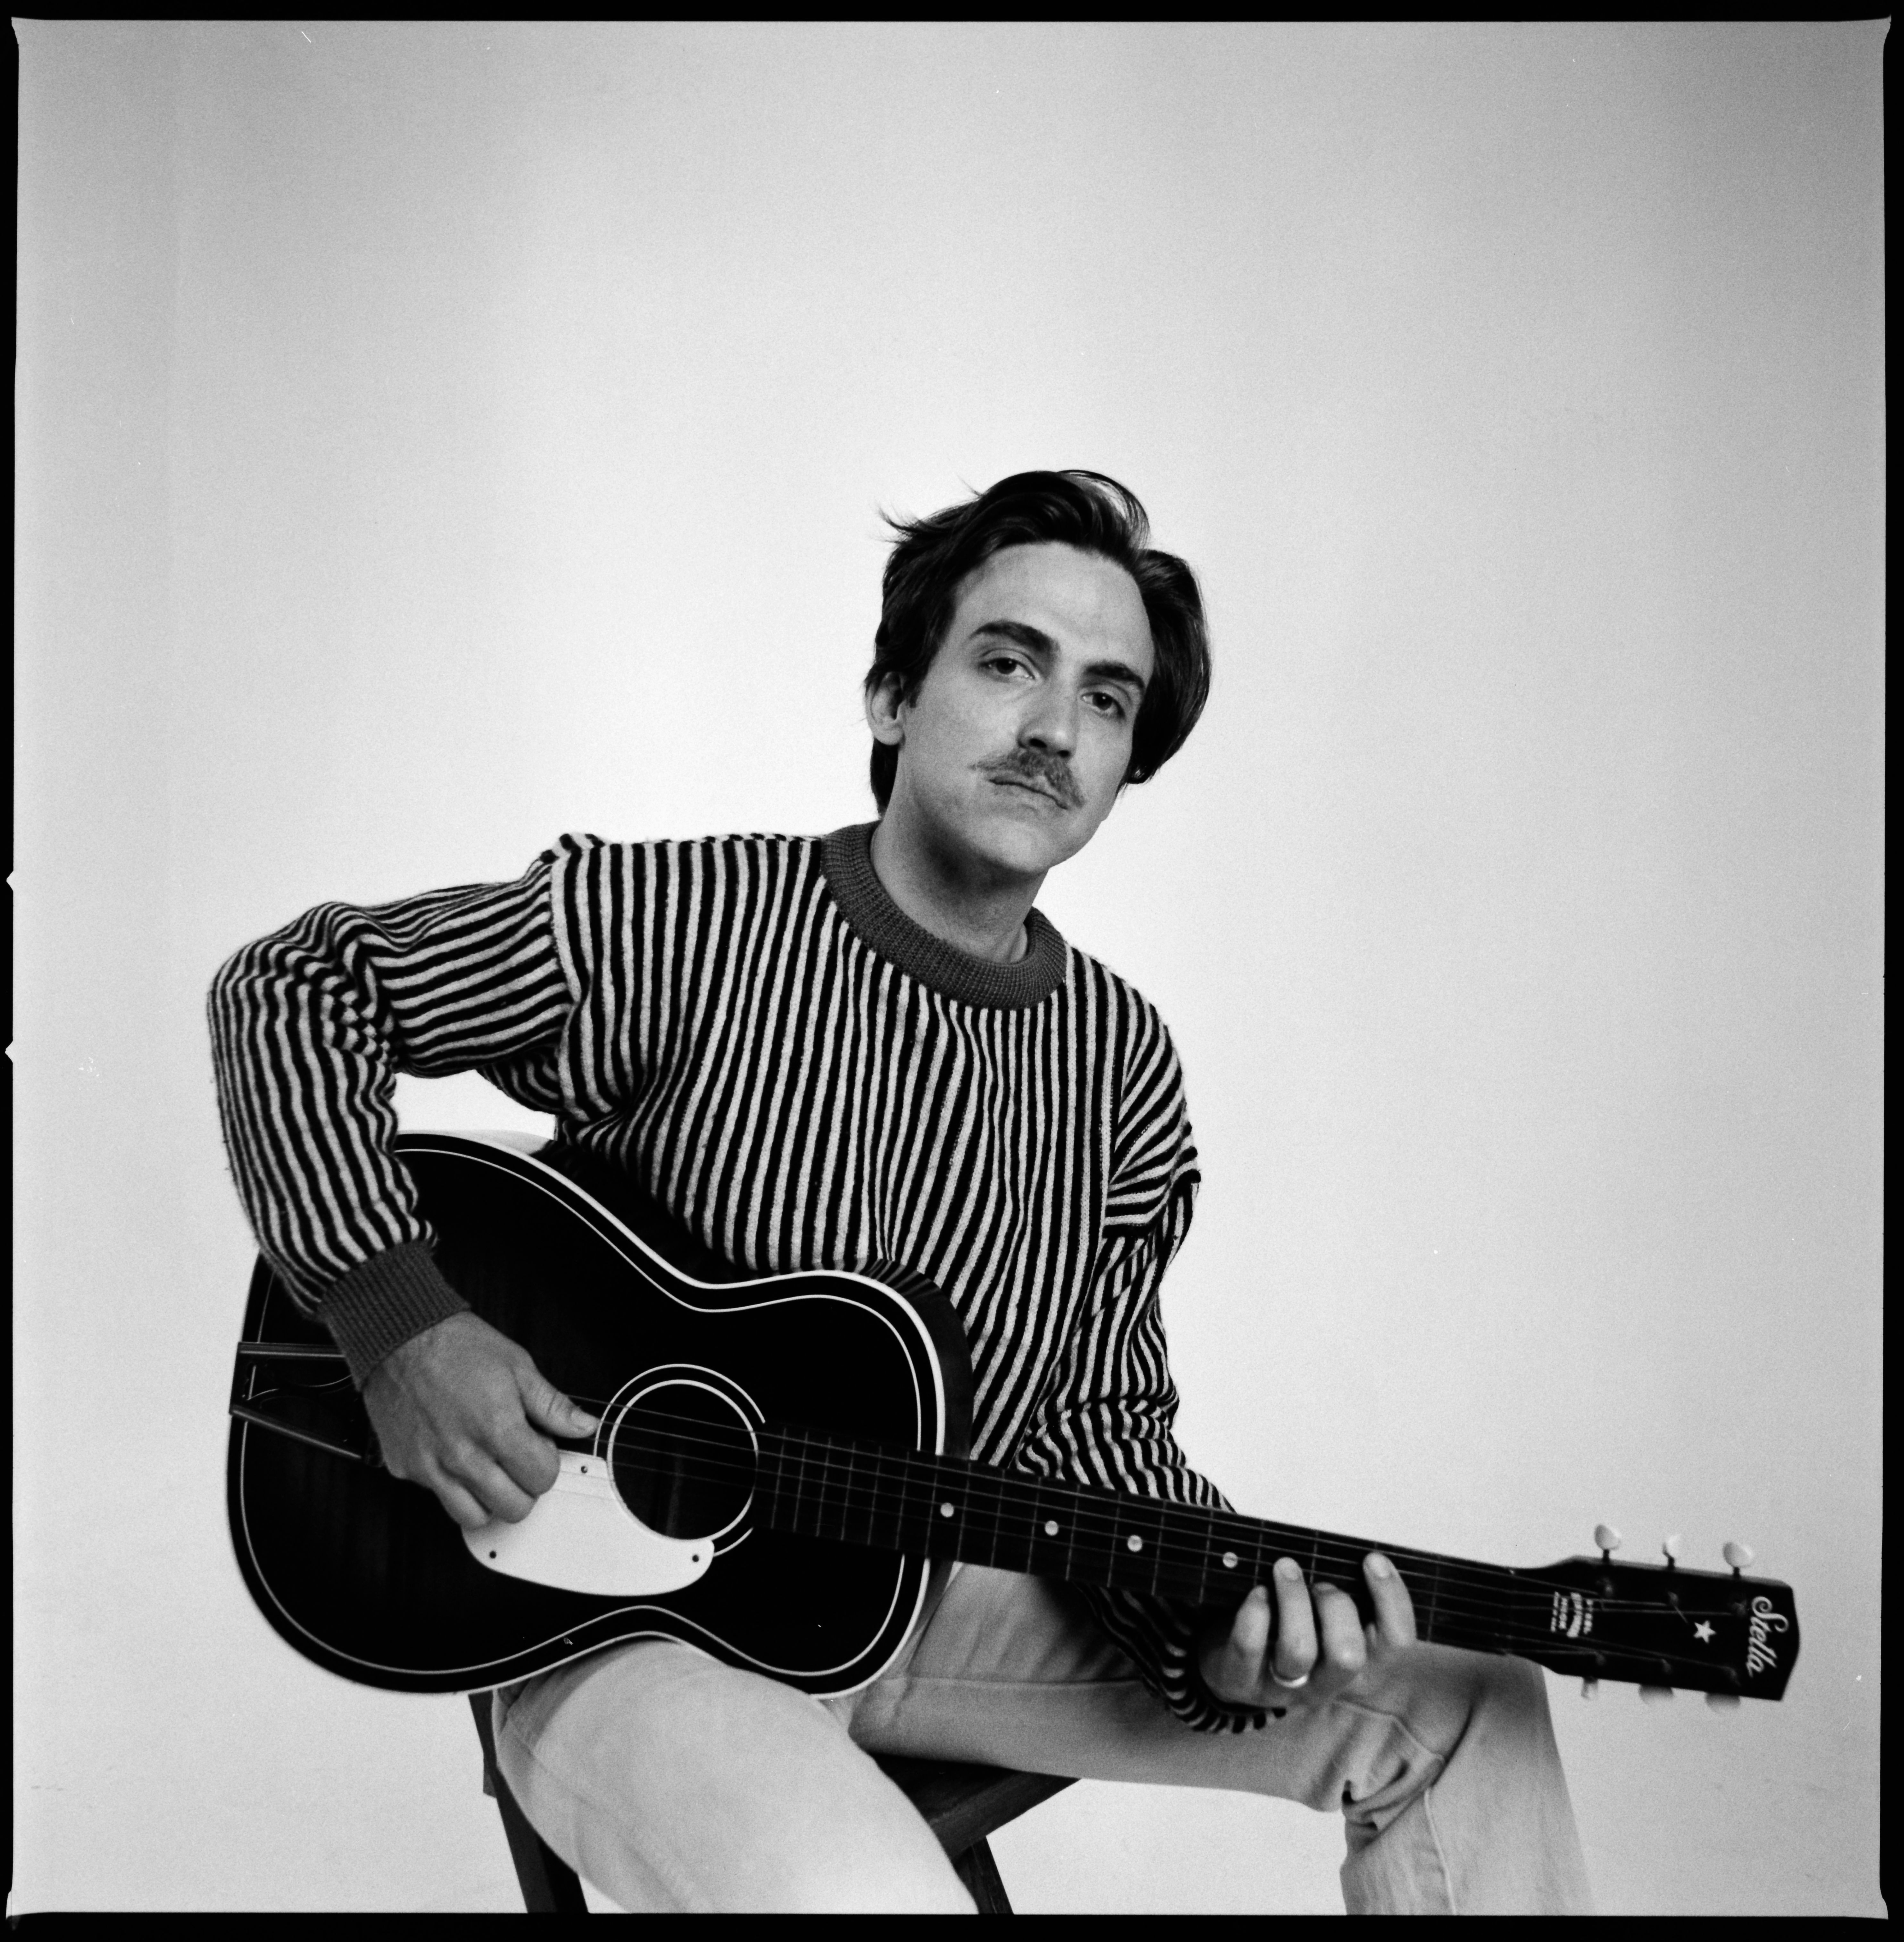 Holding an acoustic guitar and wearing a striped shirt, Andrew Combs faces the camera